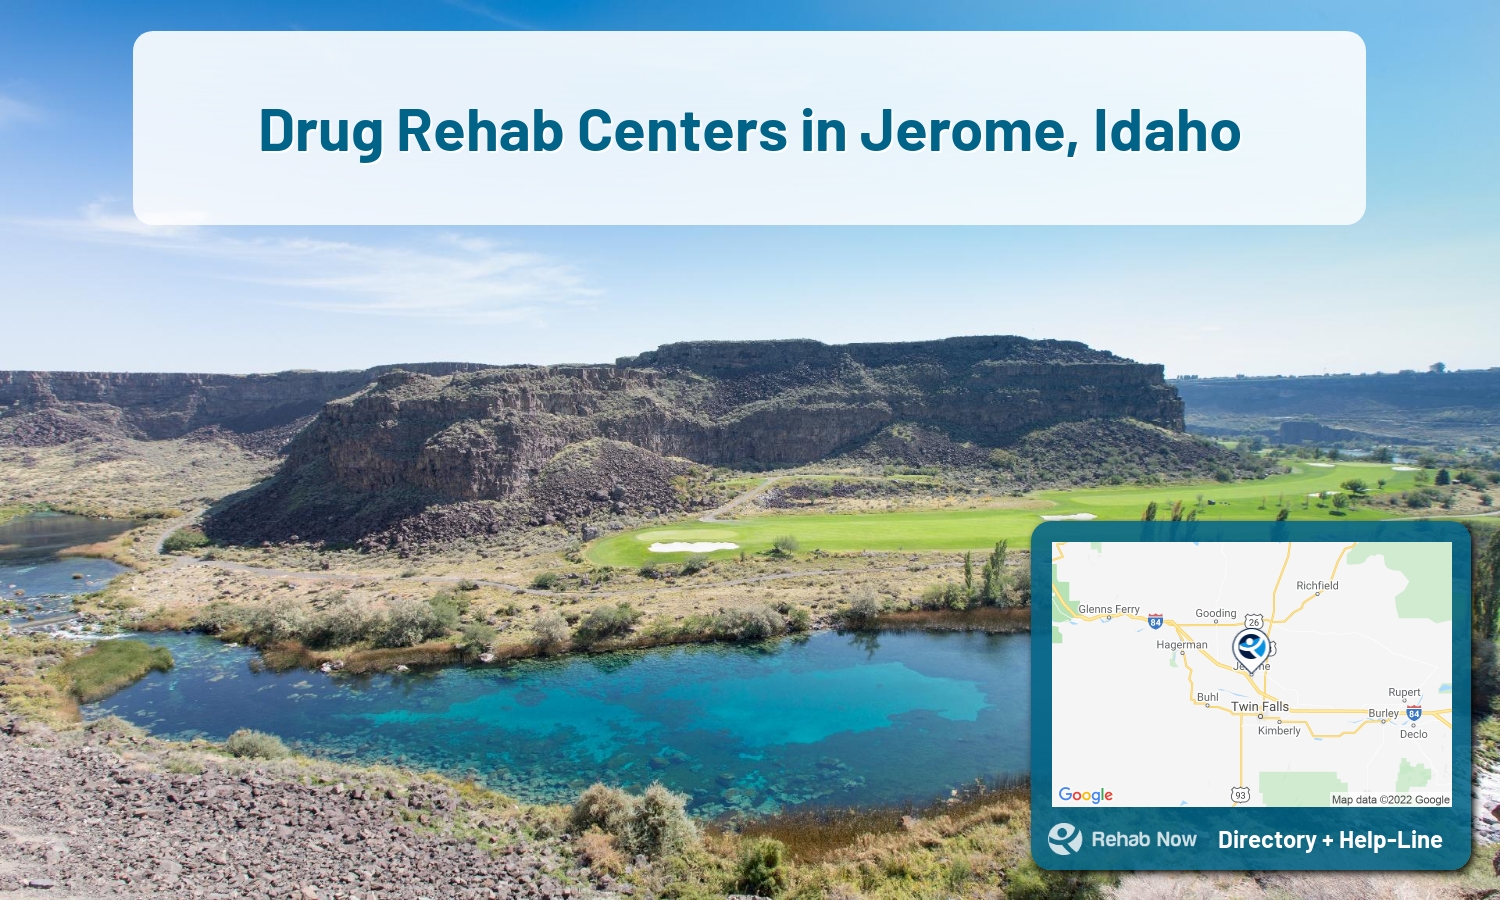 Let our expert counselors help find the best addiction treatment in Jerome, Idaho now with a free call to our hotline.